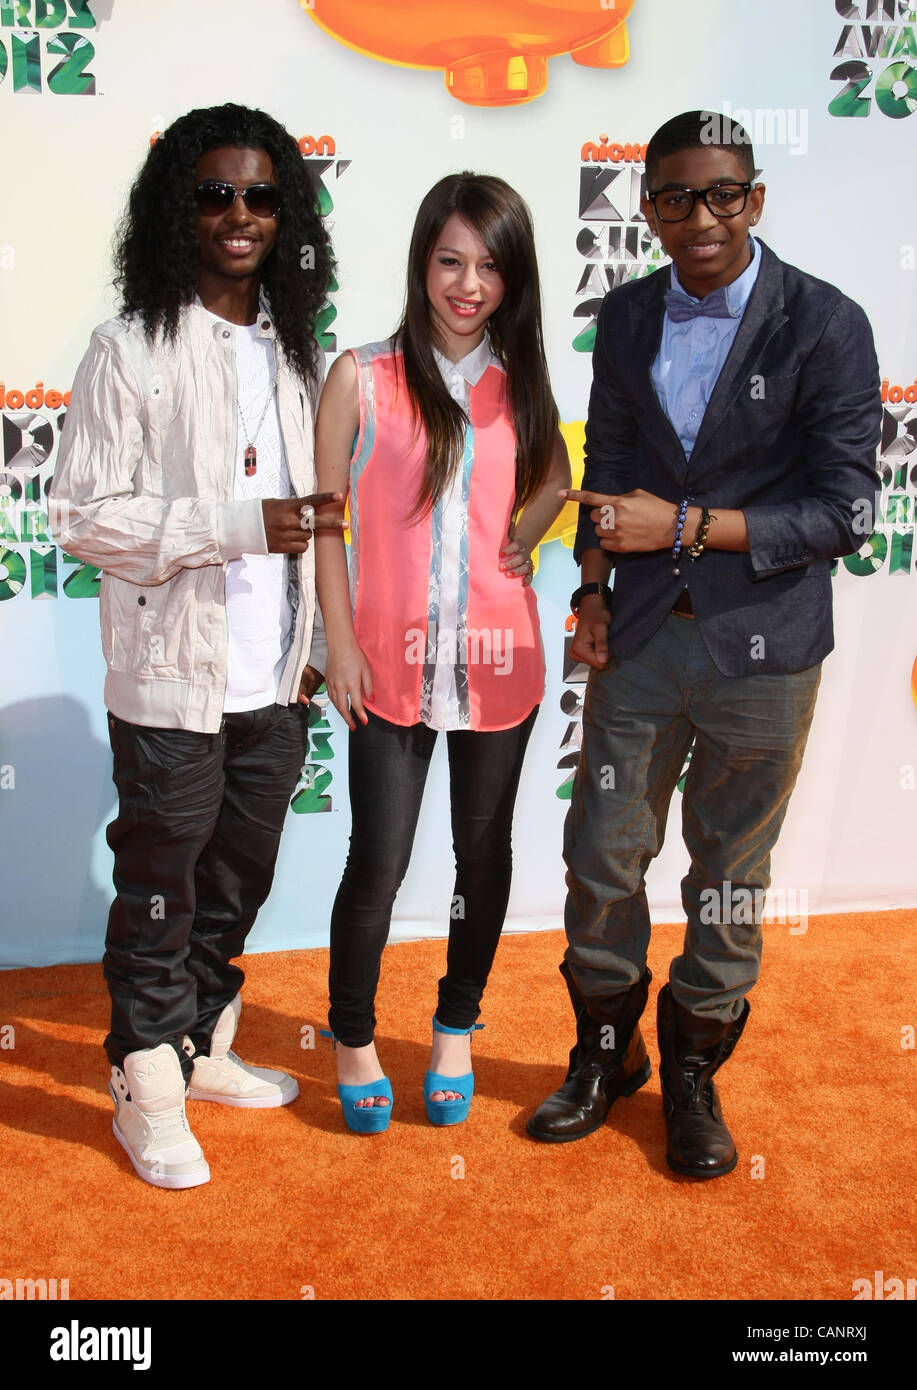 ACE PRIMO 25TH NICKELODEON KID'S CHOICE AWARDS DOWNTOWN LOS ANGELES CALIFORNIA USA 31 March 2012 Stock Photo